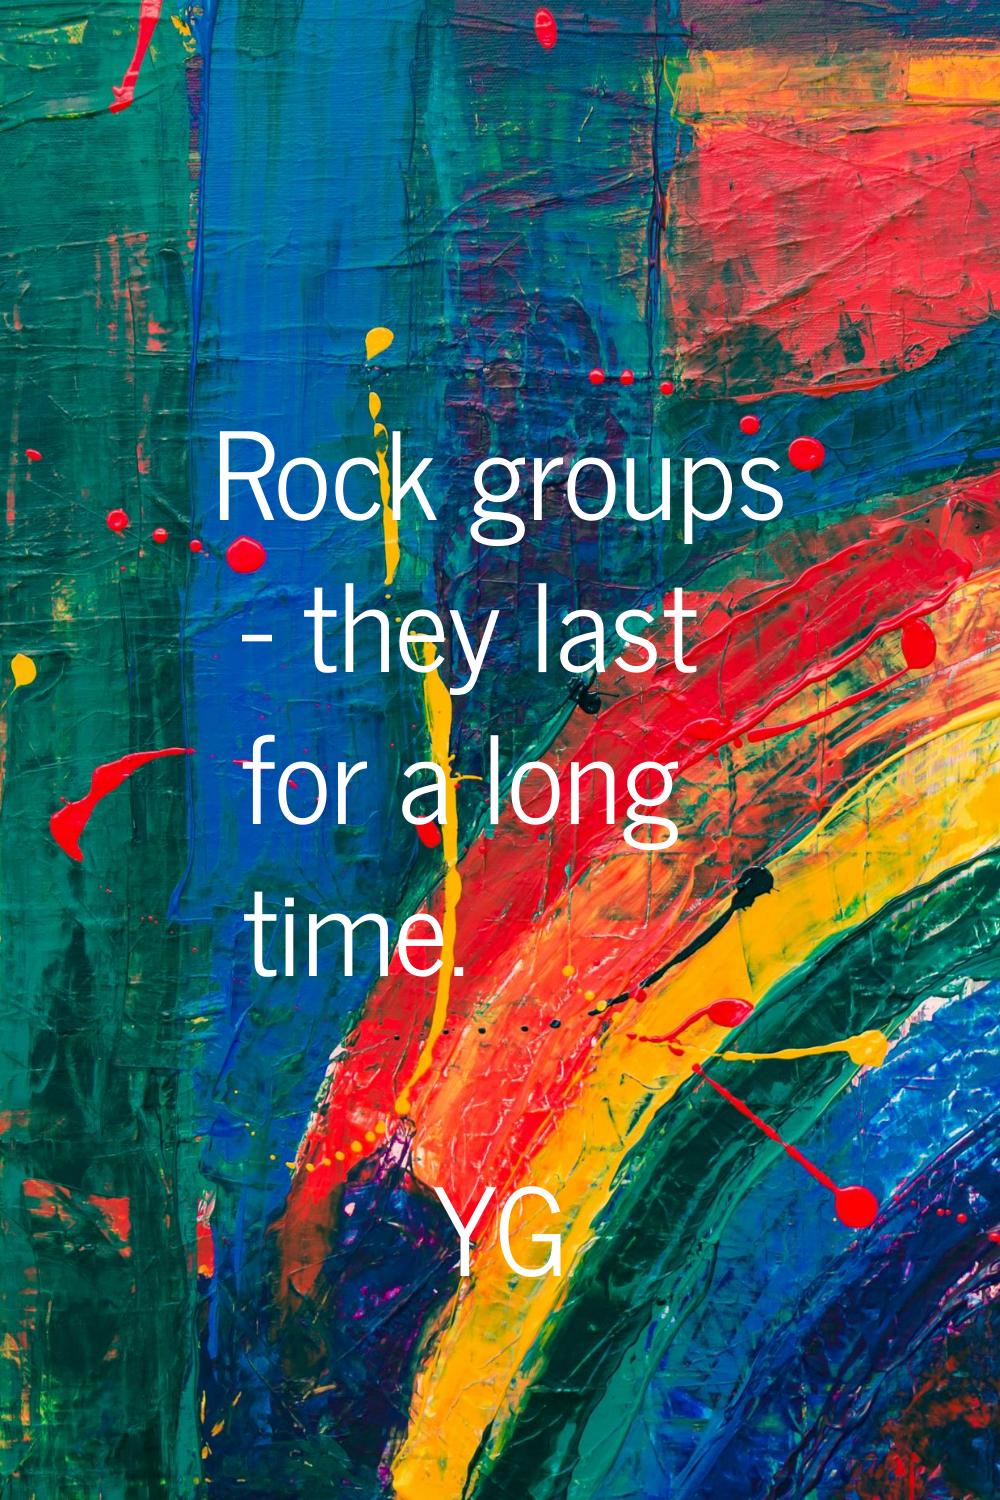 Rock groups - they last for a long time.